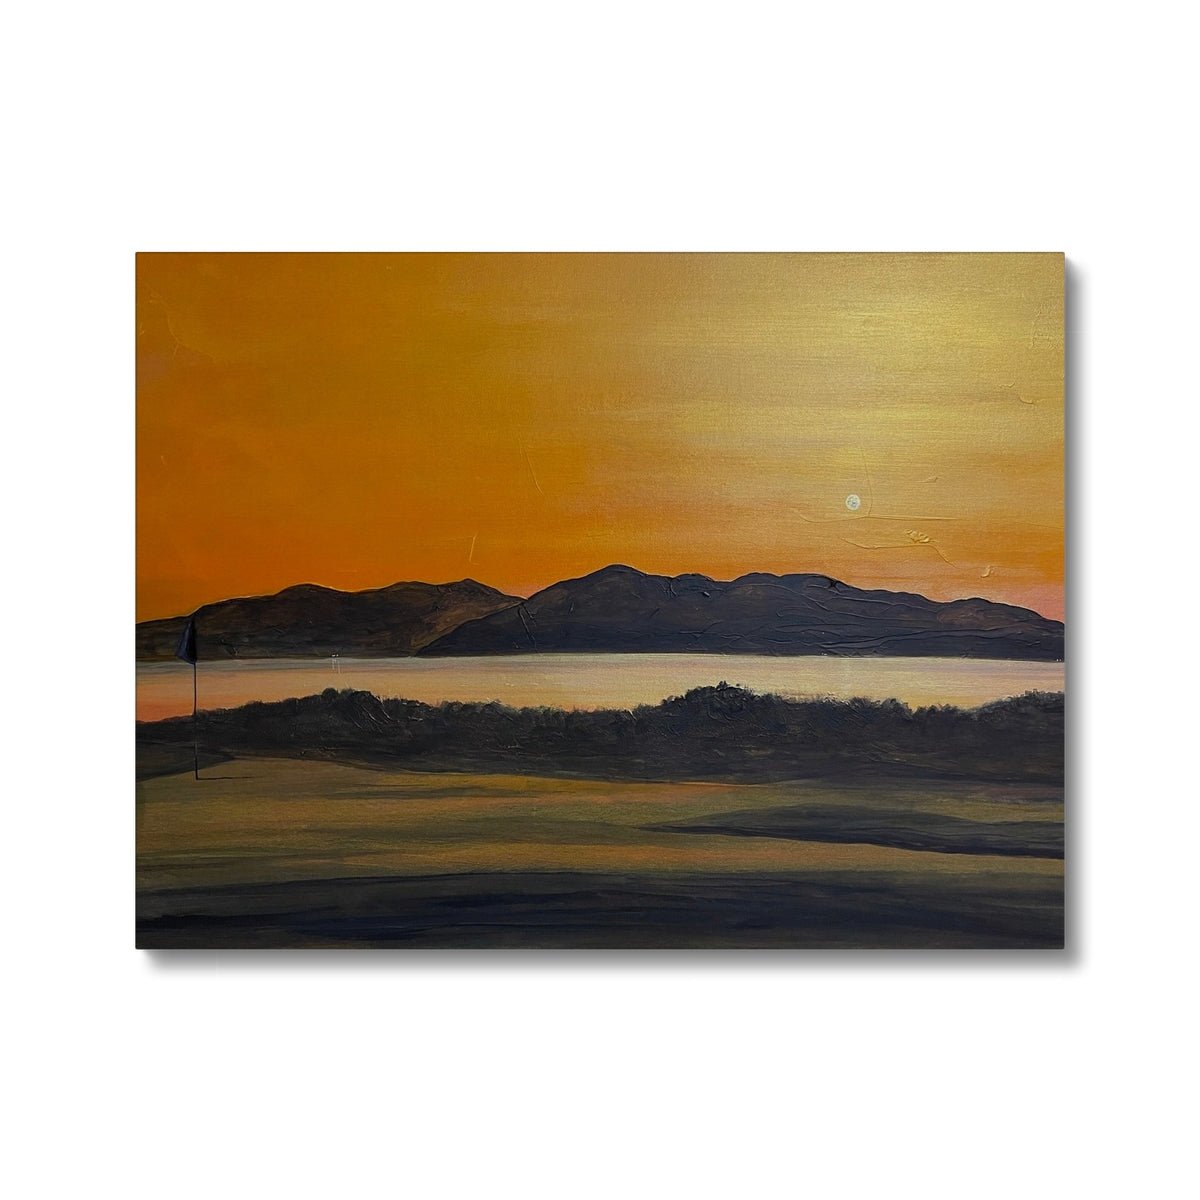 Arran & The 5th Green Royal Troon Golf Course Painting | Canvas-Contemporary Stretched Canvas Prints-Arran Art Gallery-24"x18"-Paintings, Prints, Homeware, Art Gifts From Scotland By Scottish Artist Kevin Hunter